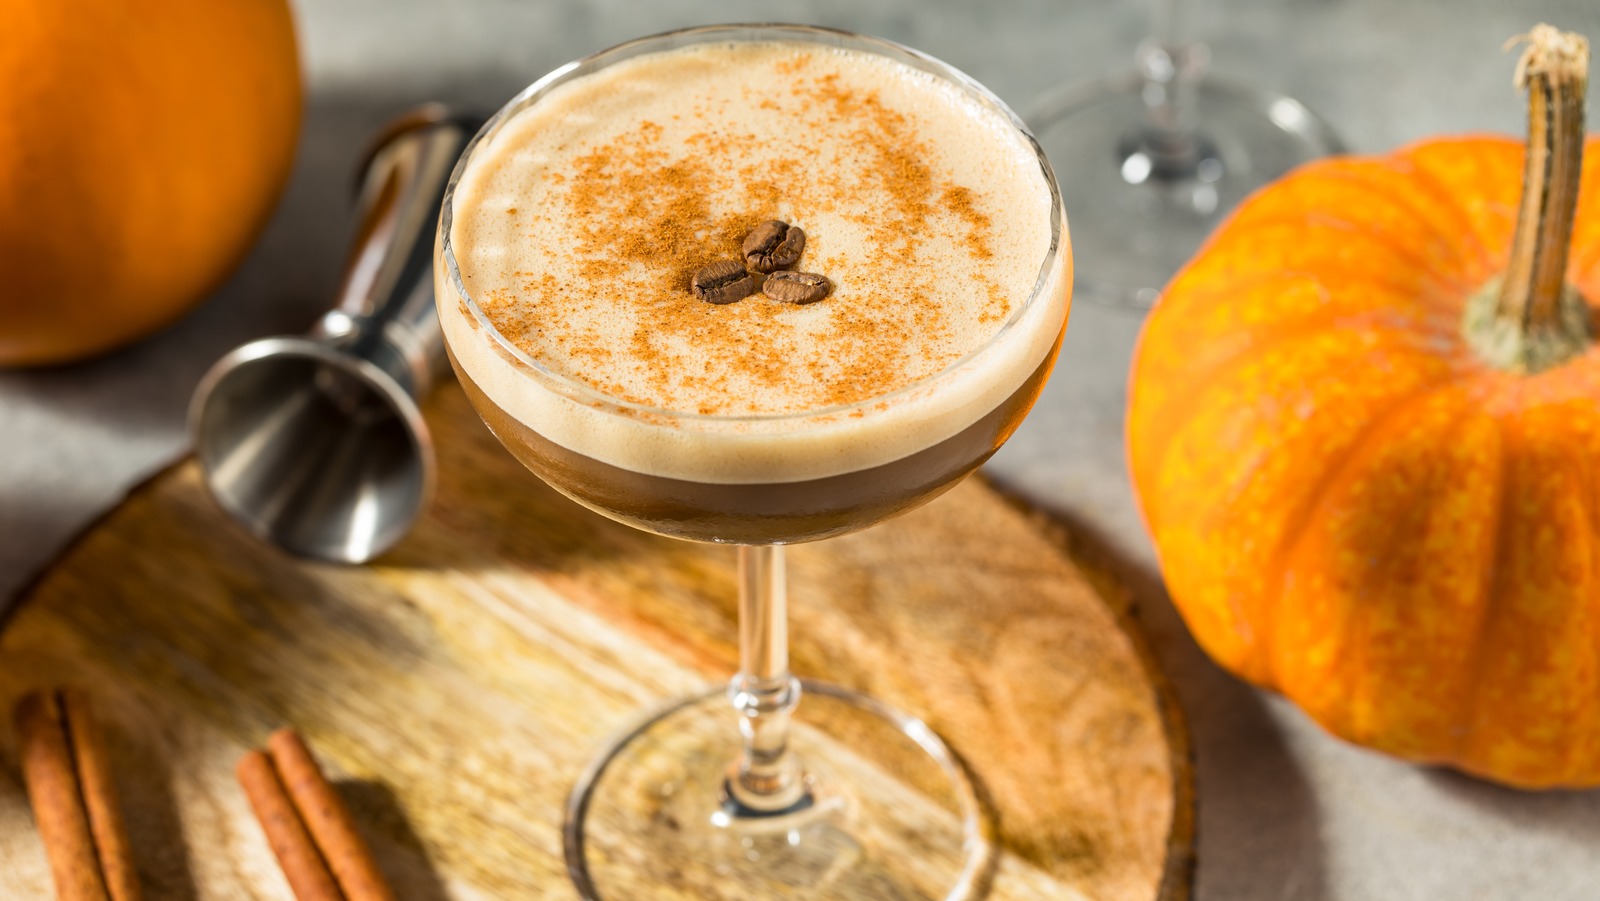 https://www.tastingtable.com/img/gallery/frozen-pumpkin-espresso-martinis-are-the-coolest-drink-to-sip-this-fall/l-intro-1697245263.jpg